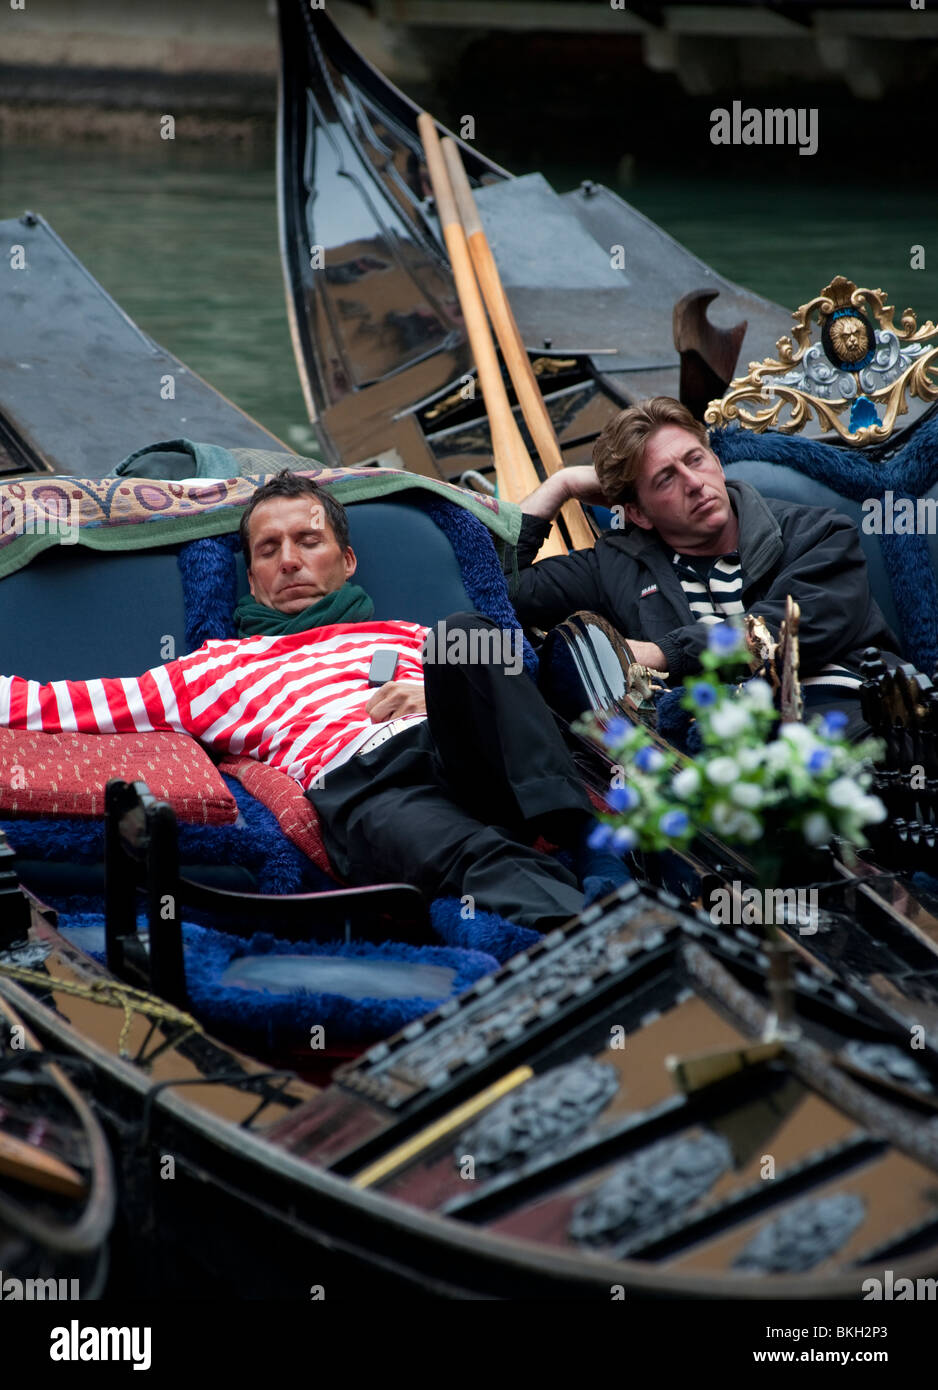 Gondoliers resting in their gondolas on a canal in Venice Italy Stock Photo